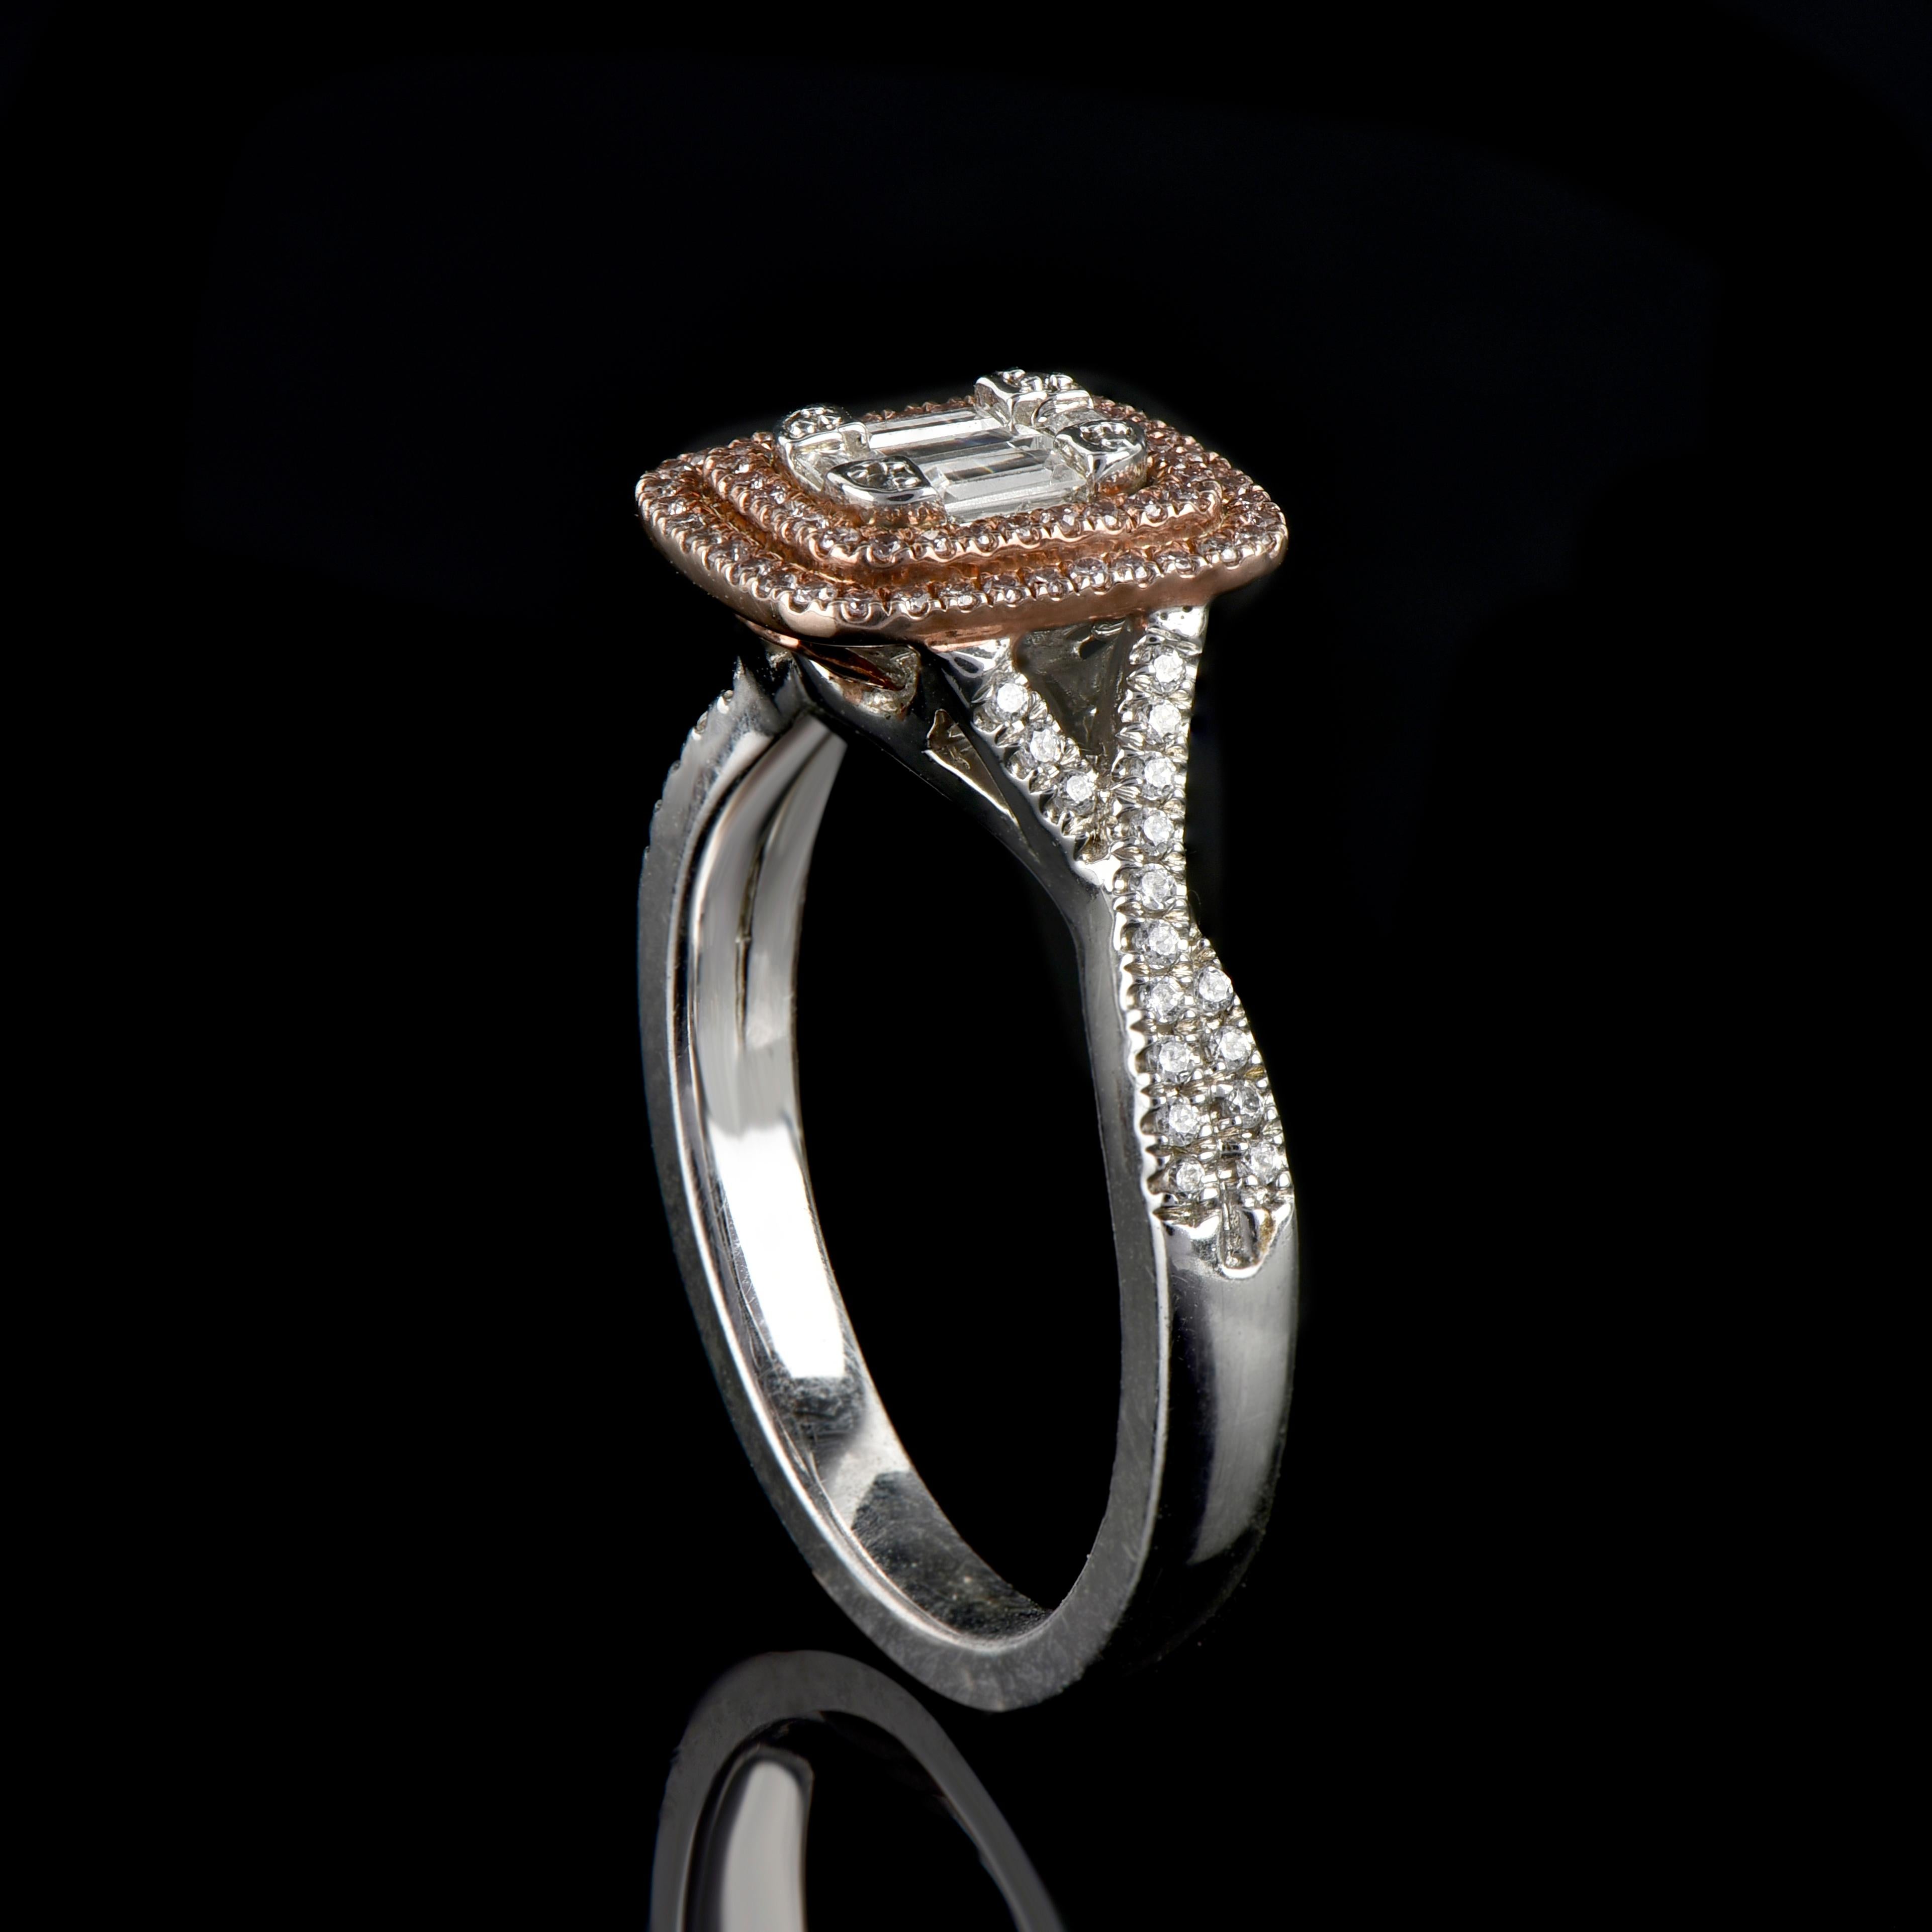 Exquisite design simmers with 38 round brilliant, 5 baguette and 64 pink natural diamond set beautifully in prong setting and H-I color I2 Clarity. Fashioned in 14 kt white gold
